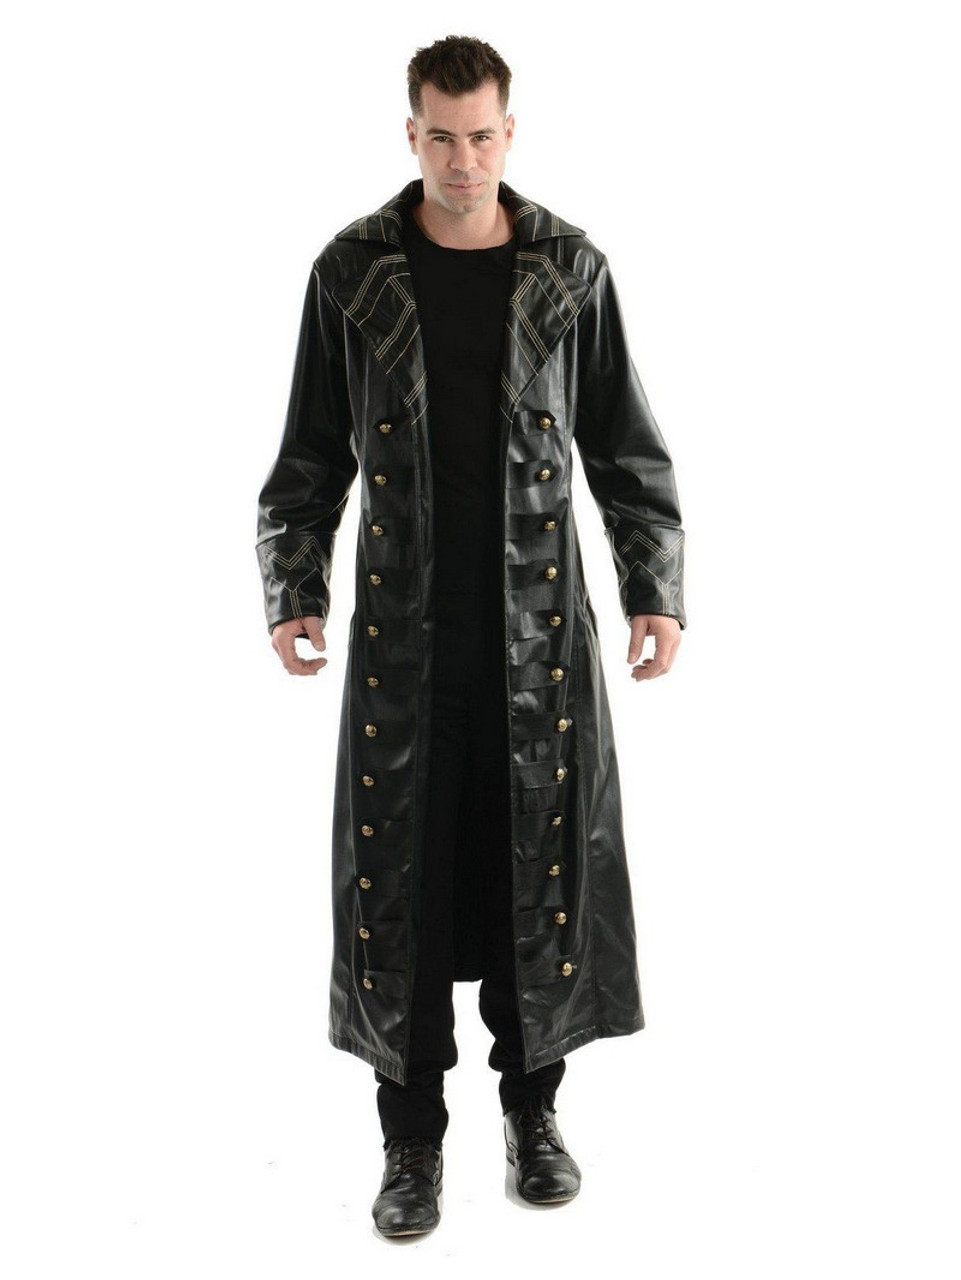 Adult Steampunk Pirate Trench Coat Costume Accessory